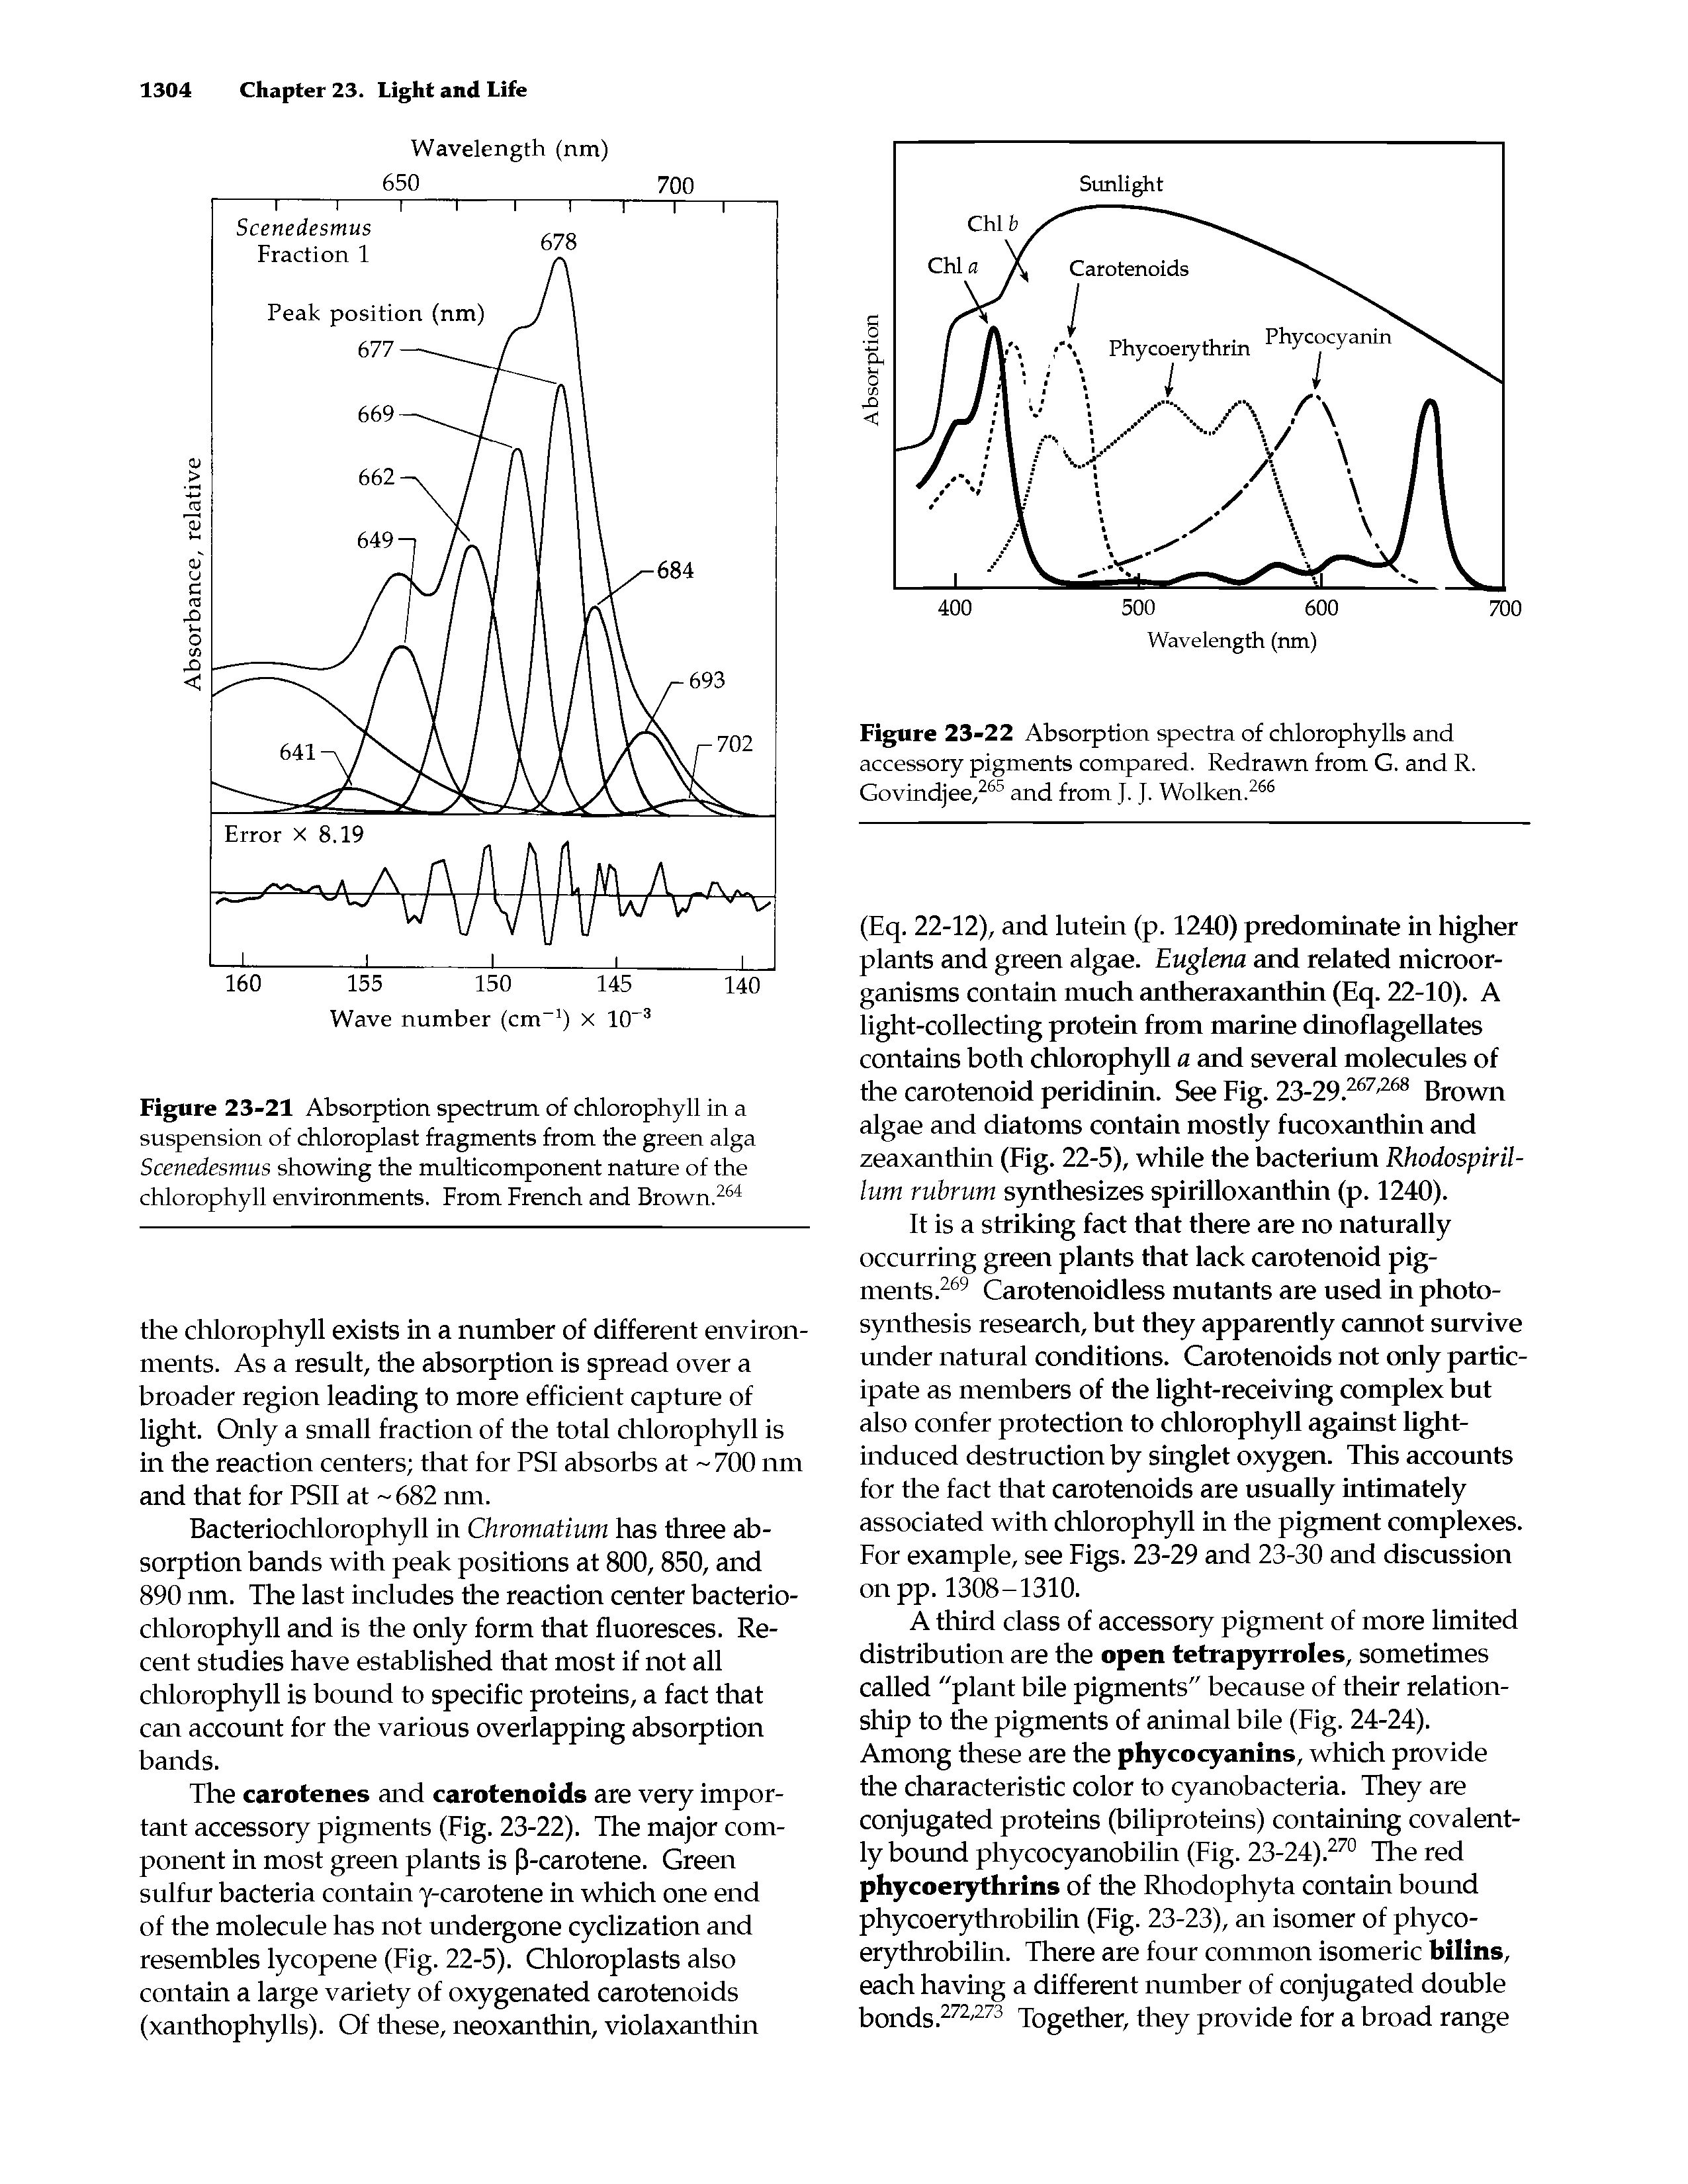 Figure 23-22 Absorption spectra of chlorophylls and accessory pigments compared. Redrawn from G. and R. Govindjee,265 and from J. J. Wolken 266...